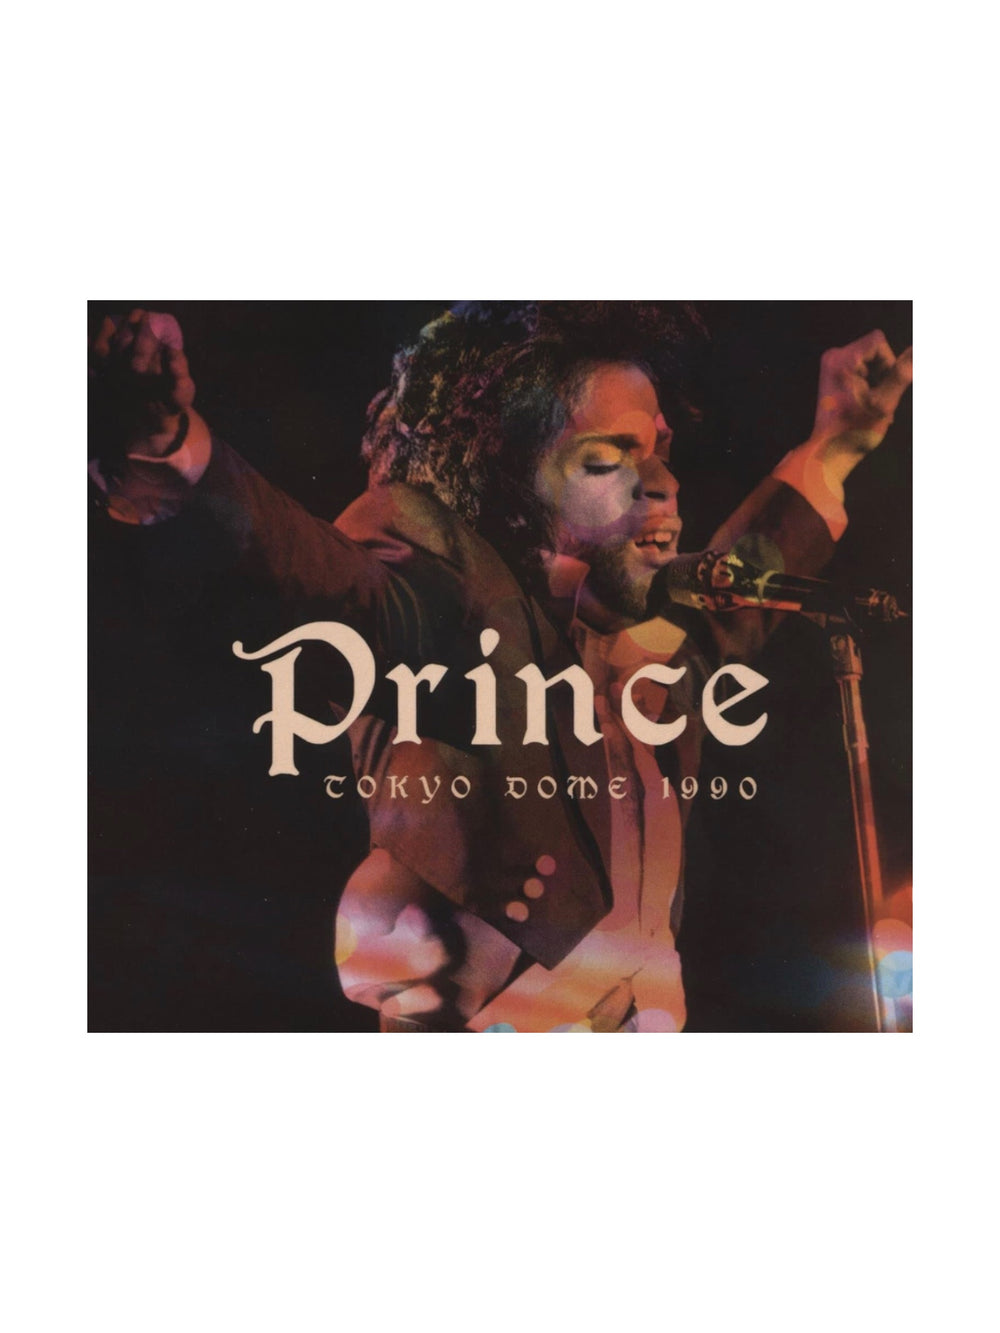 Prince – Tokyo Dome CD Album x 2 Licence Approved NEW: 1990